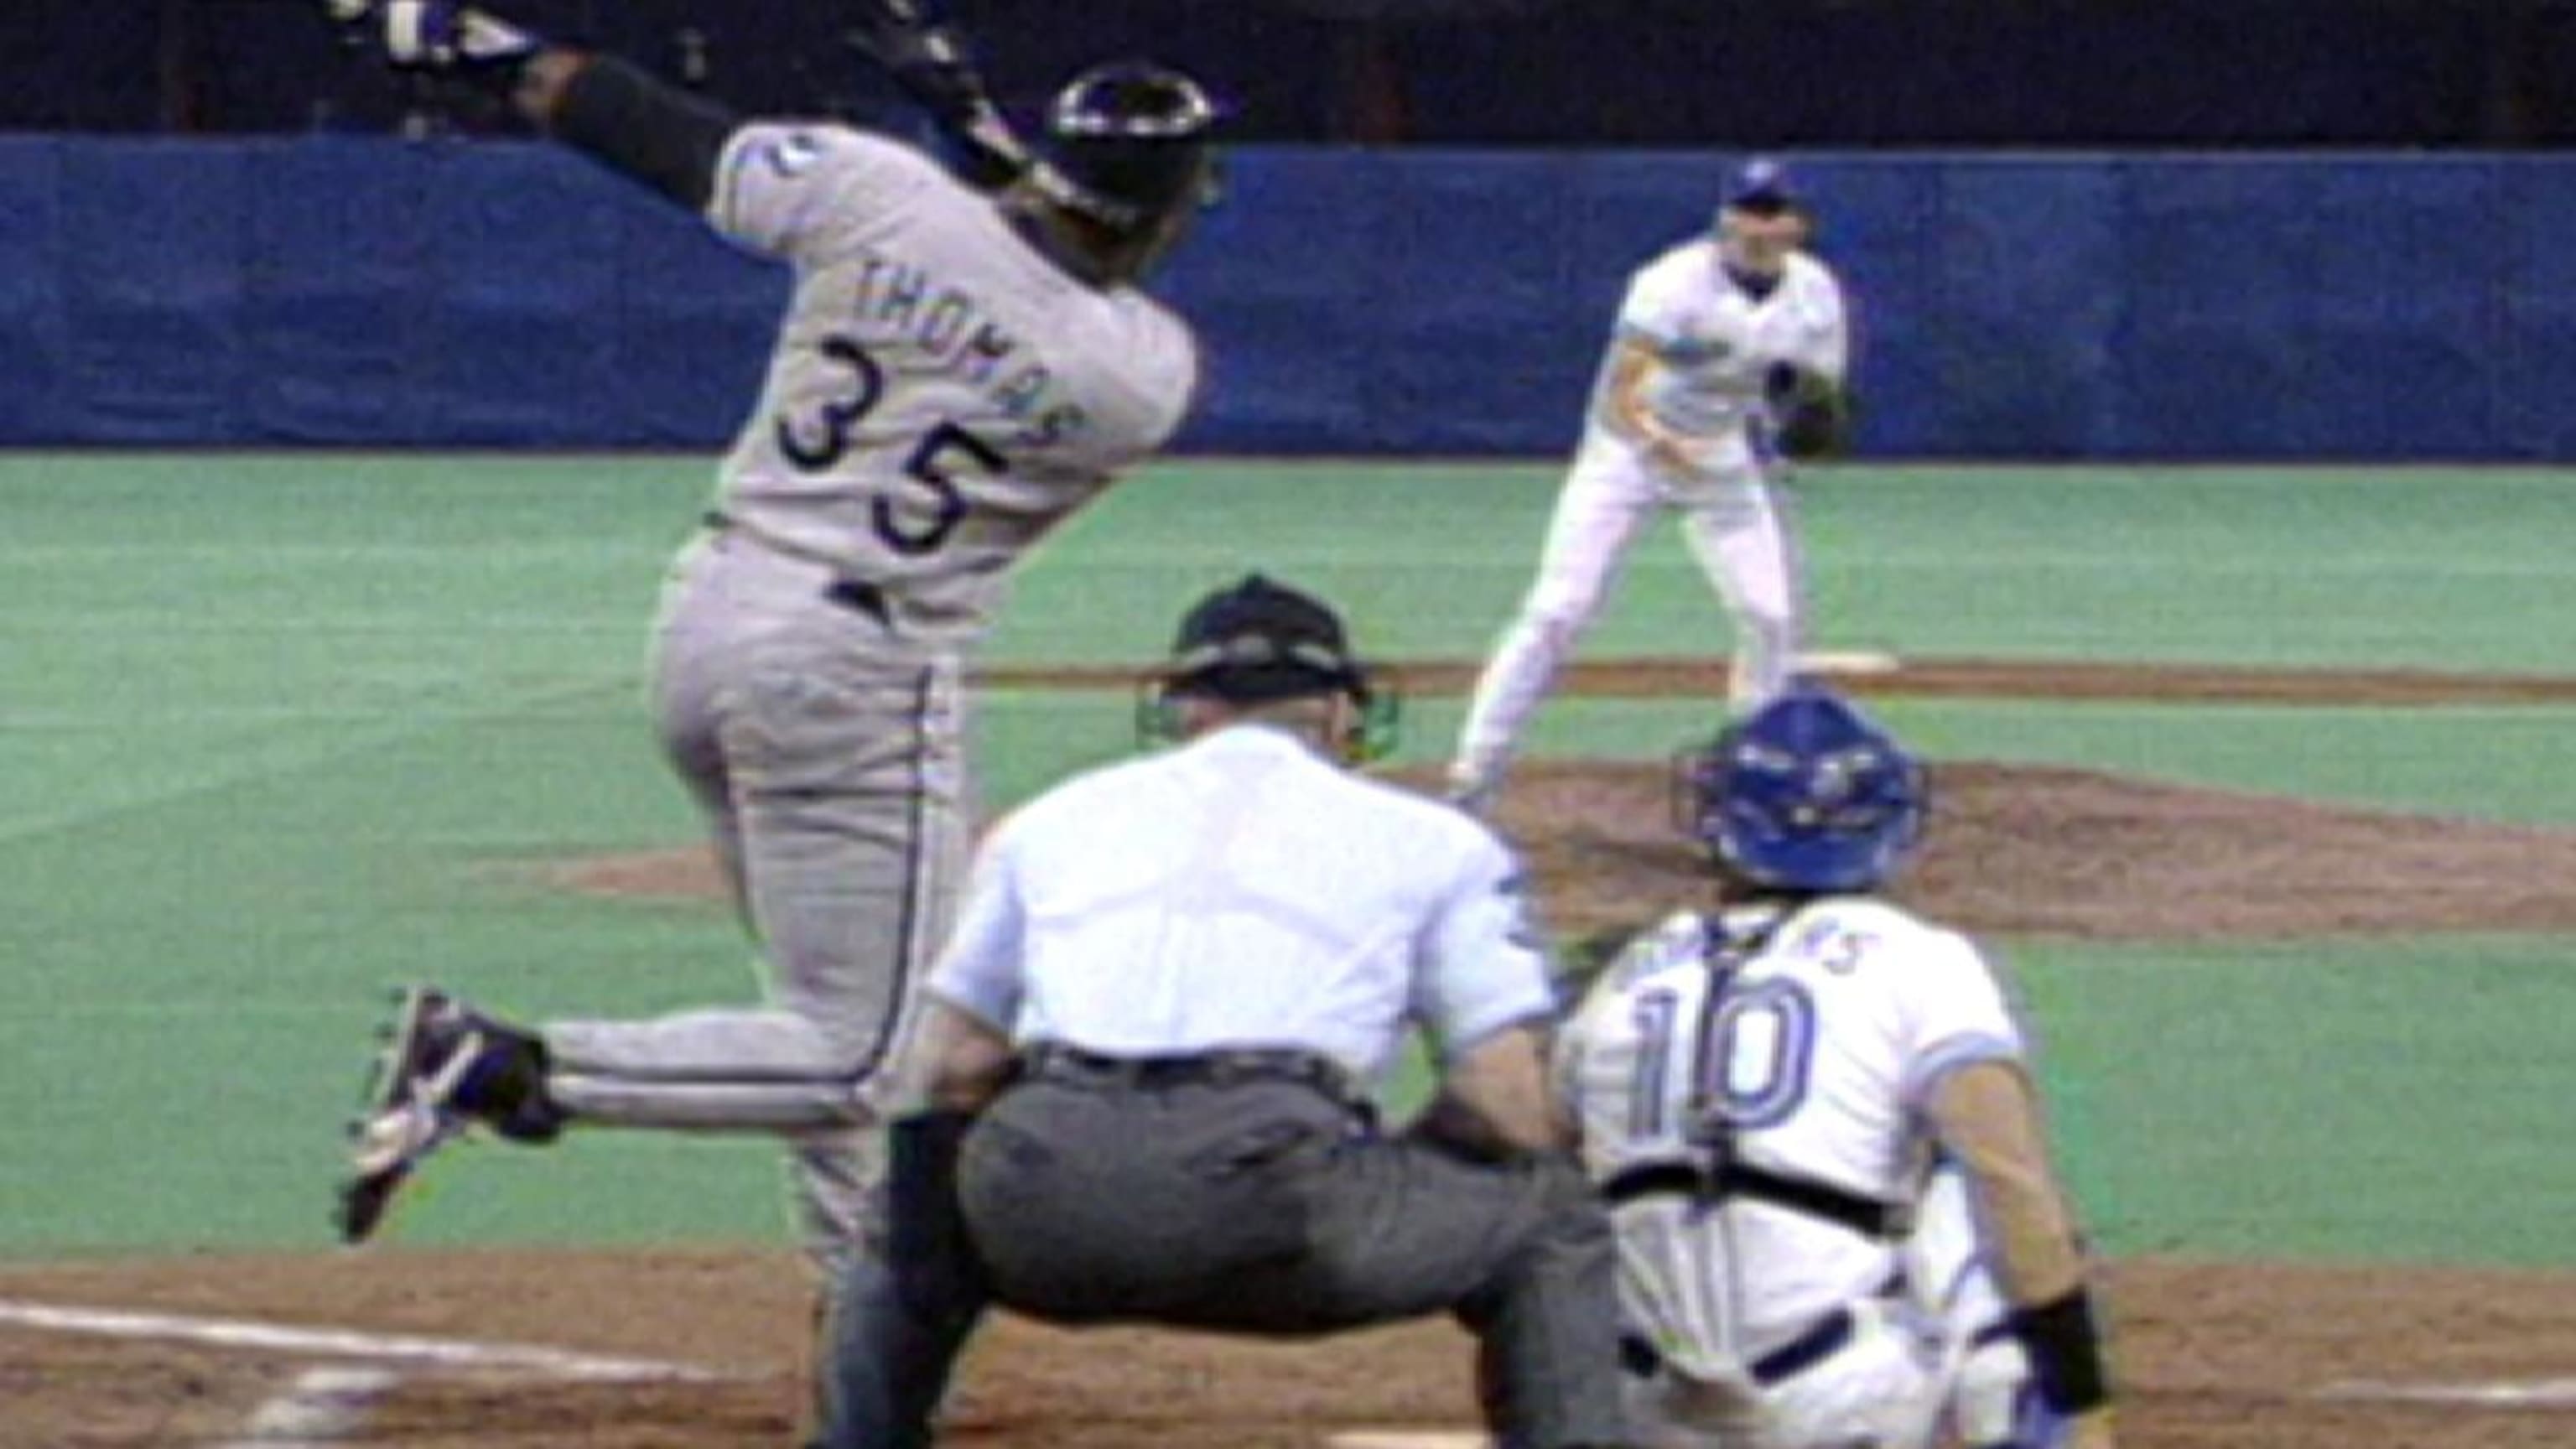 Chicago White Sox' Frank Thomas, batting against Seattle in